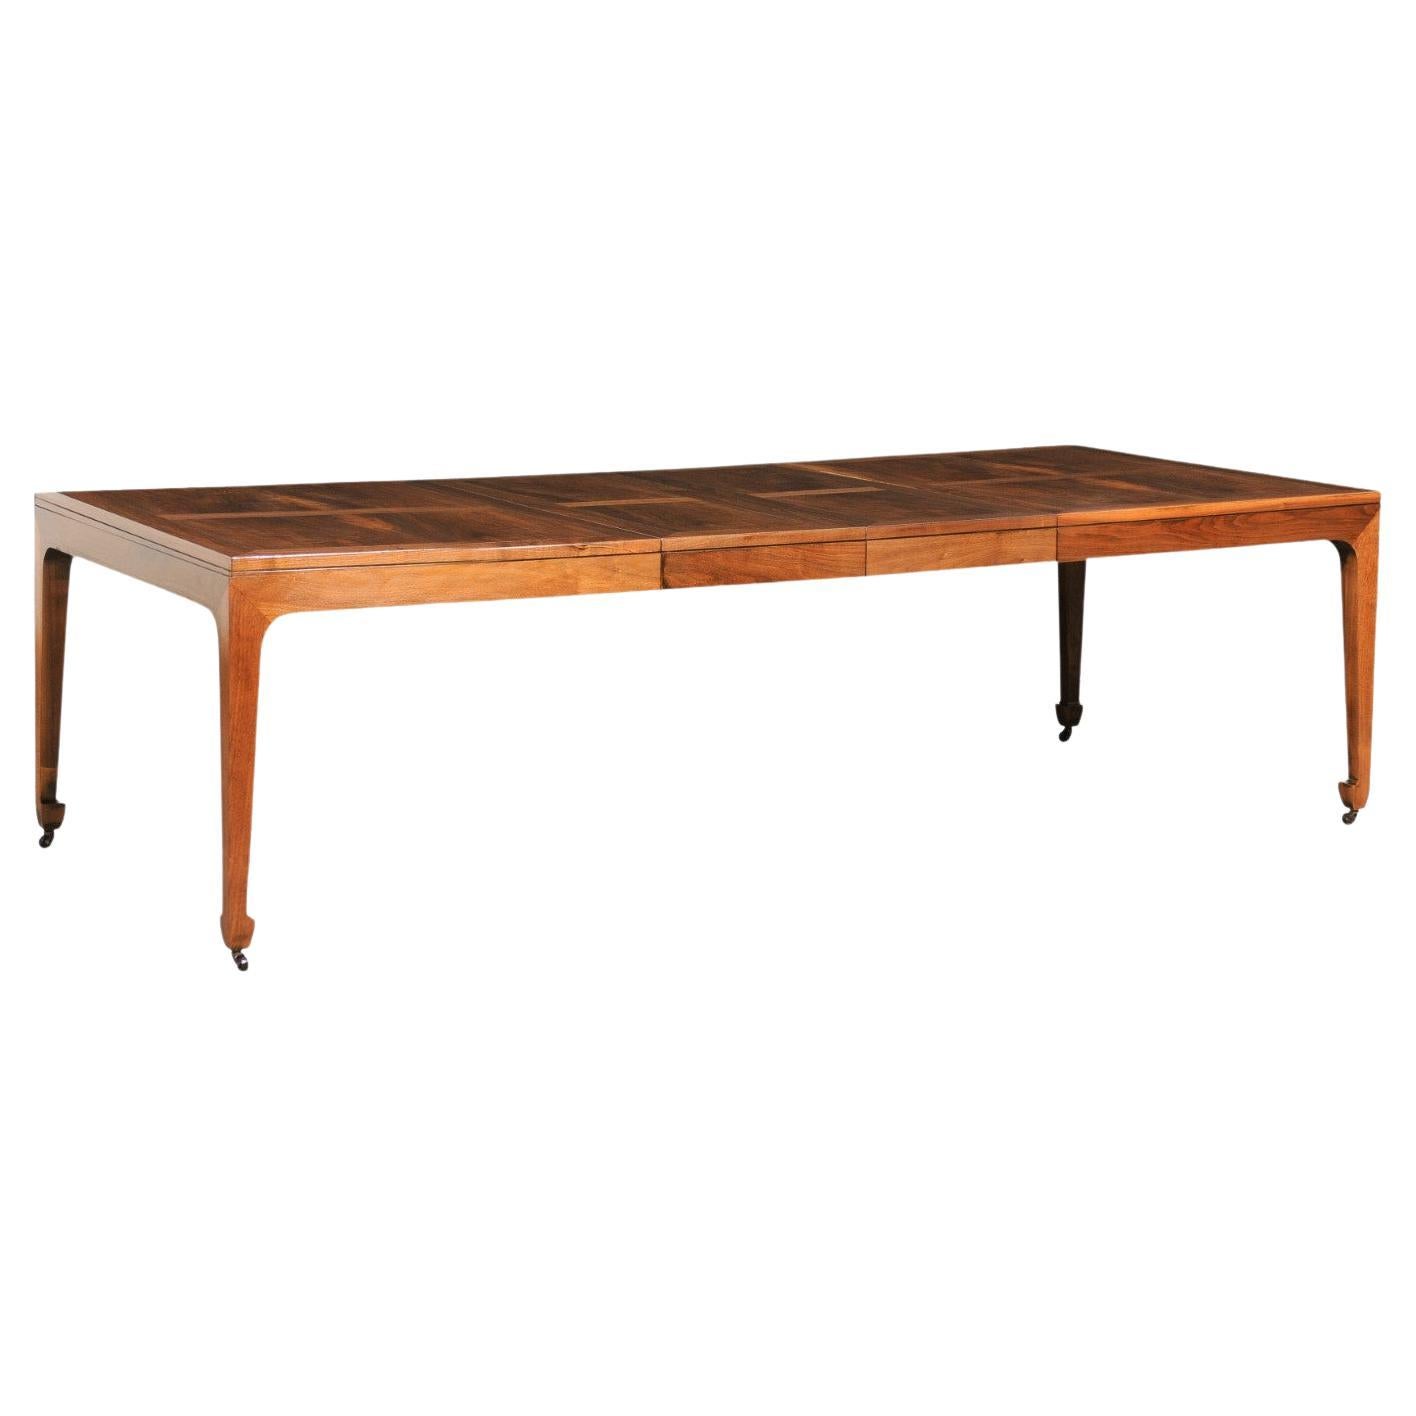 Breathtaking Restored Walnut Extension Dining Table by Baker, circa 1960 For Sale